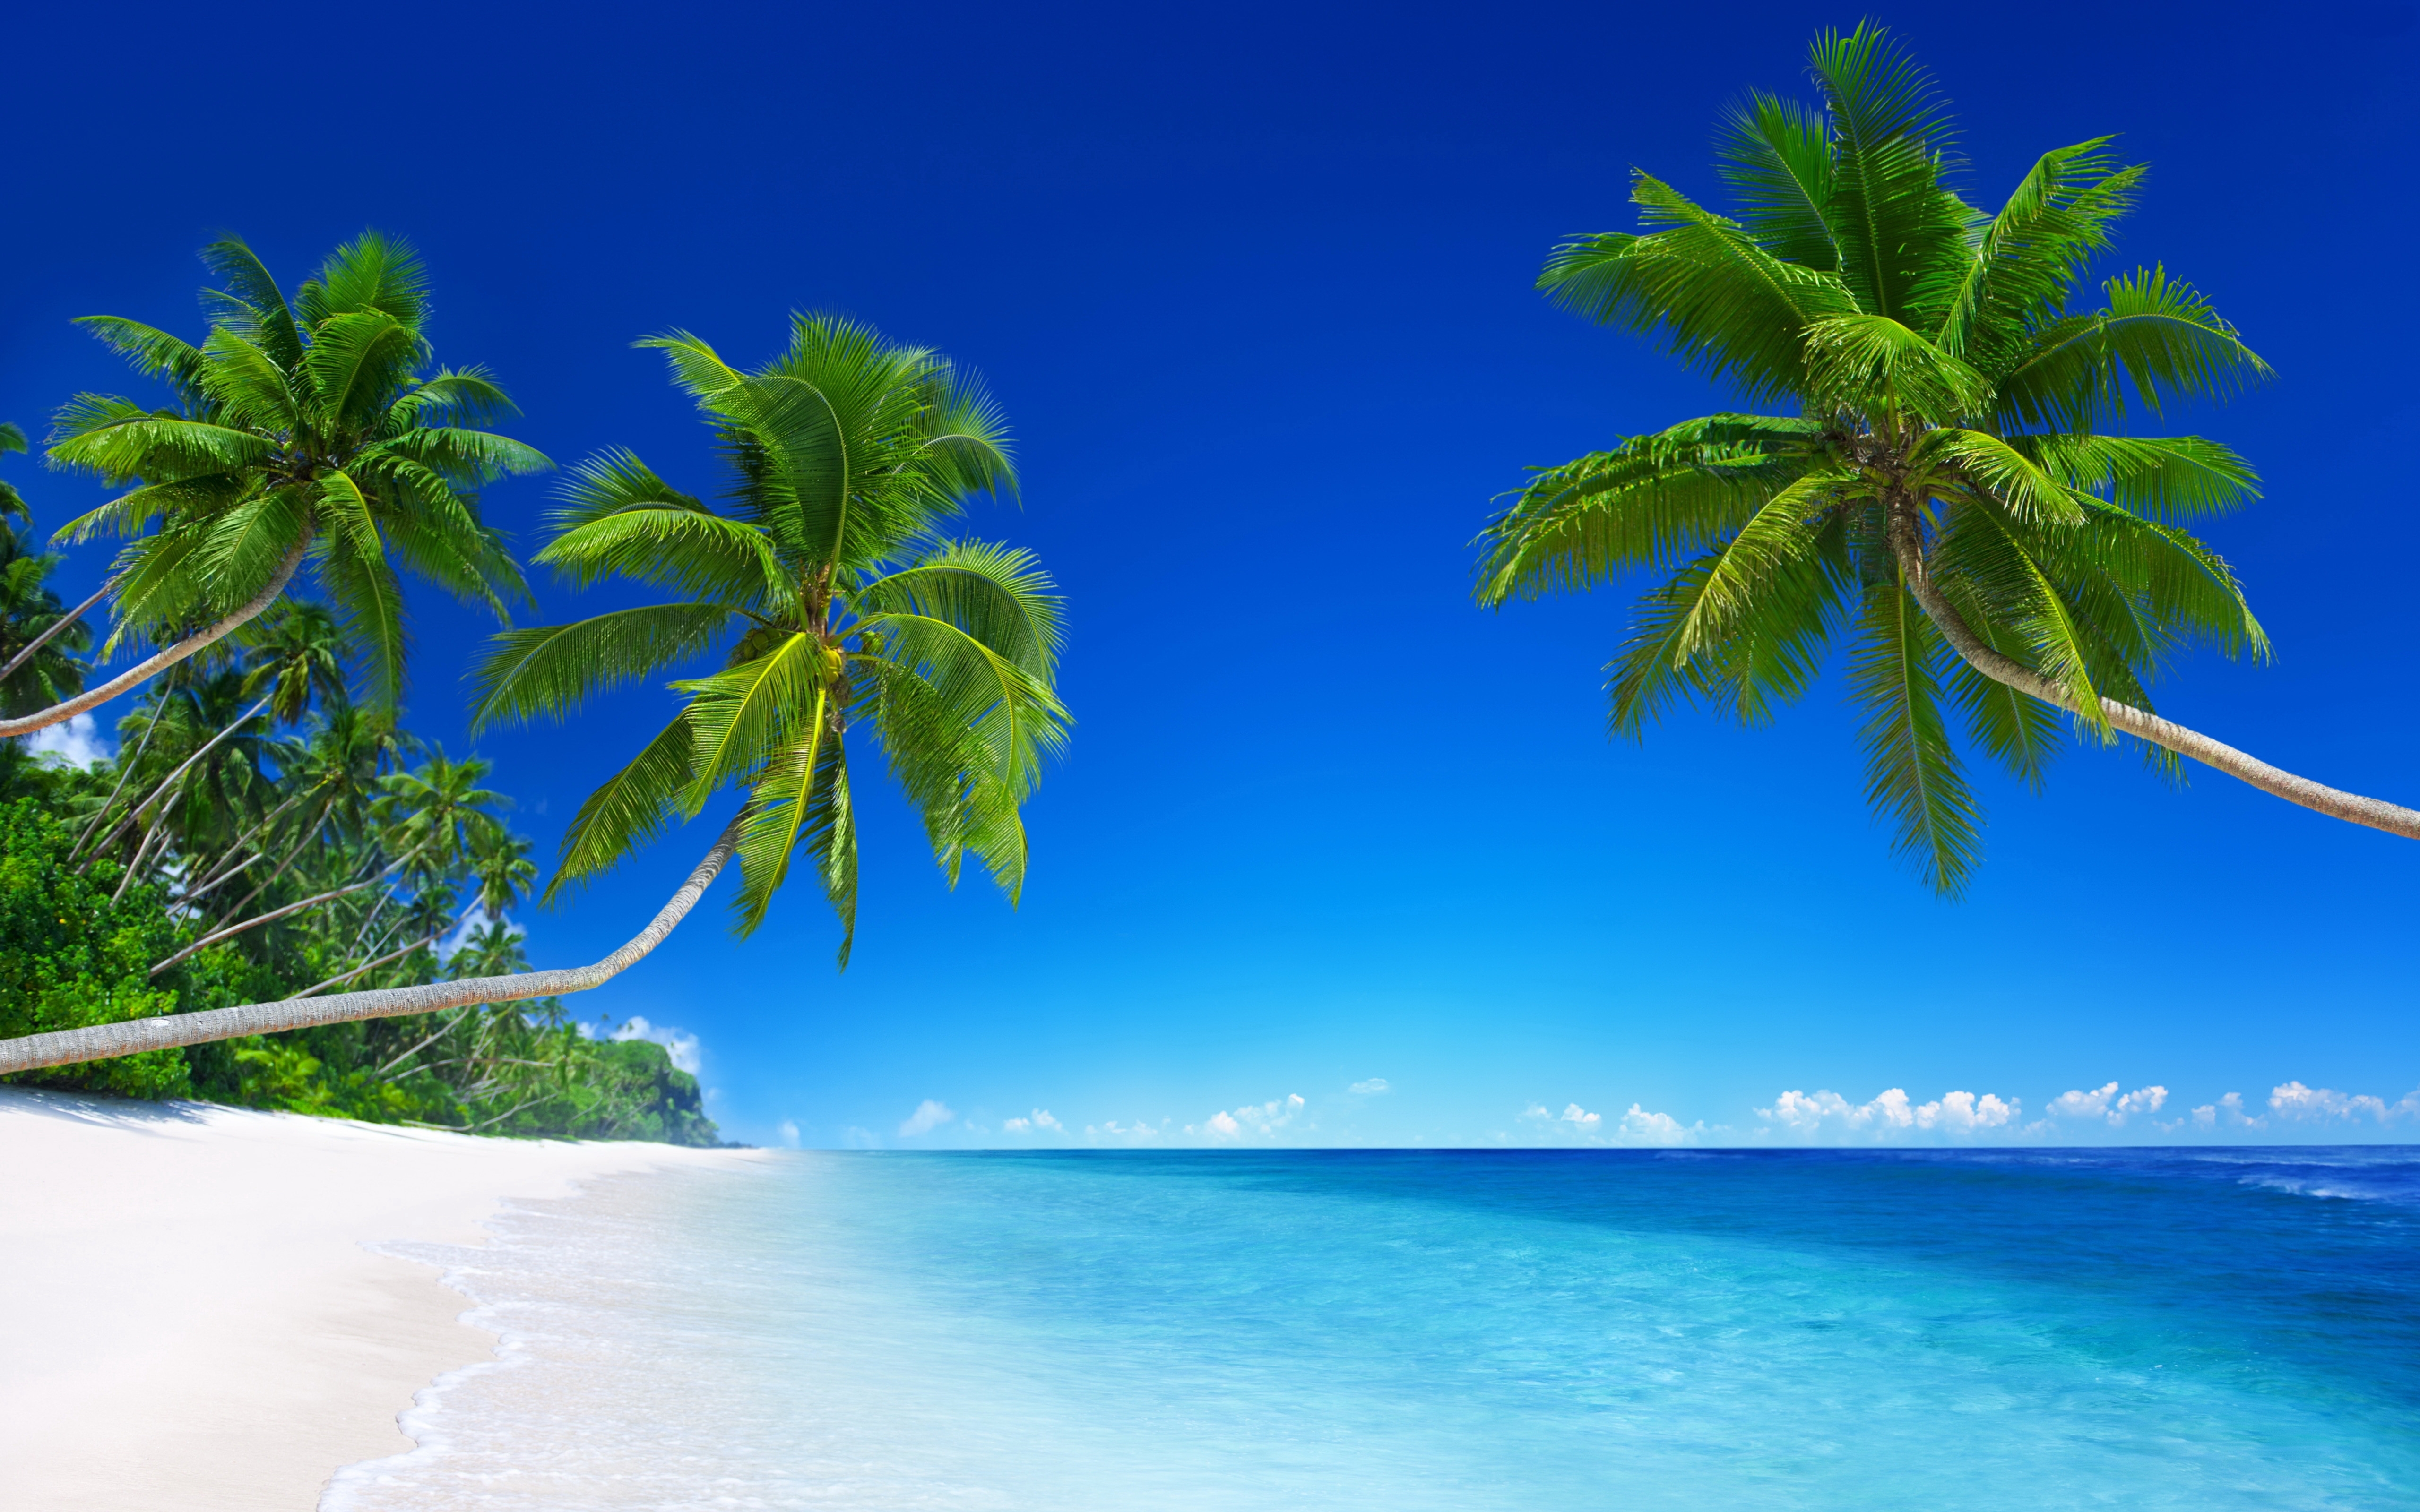 10 Latest Desktop Backgrounds Hd Beach FULL HD 1920×1080 For PC Background